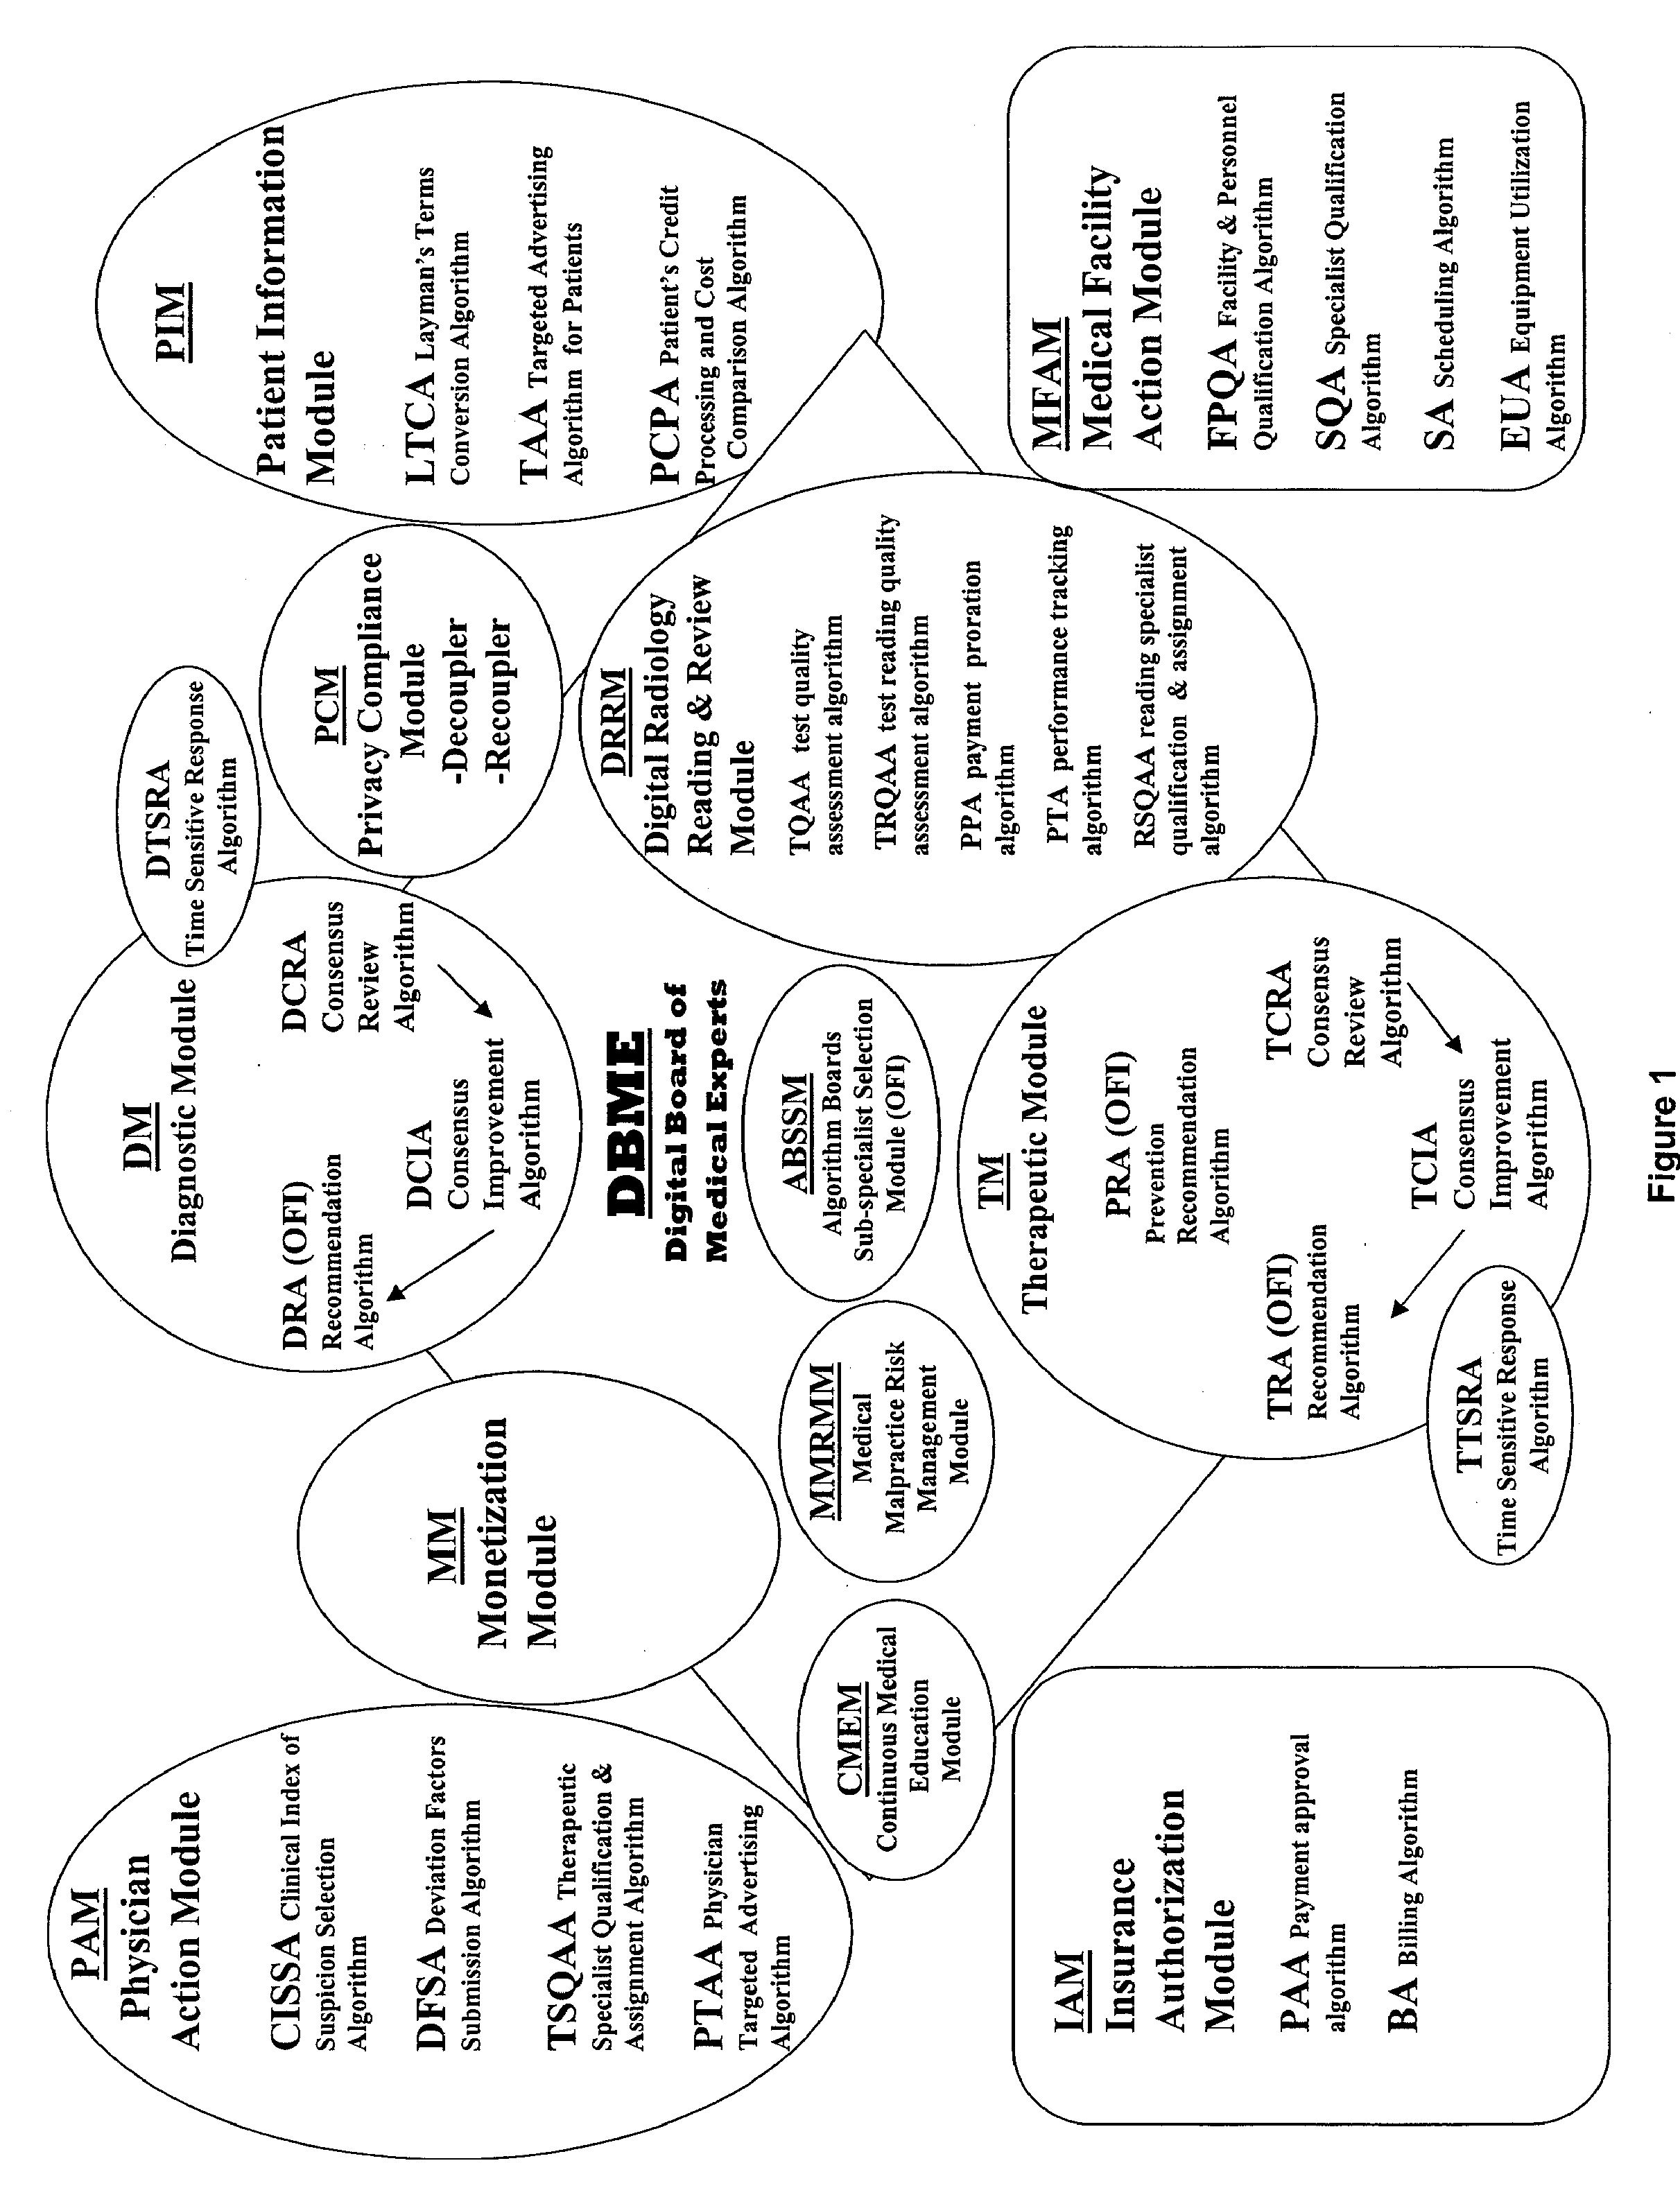 Automated System and Method for Medical Care Selection